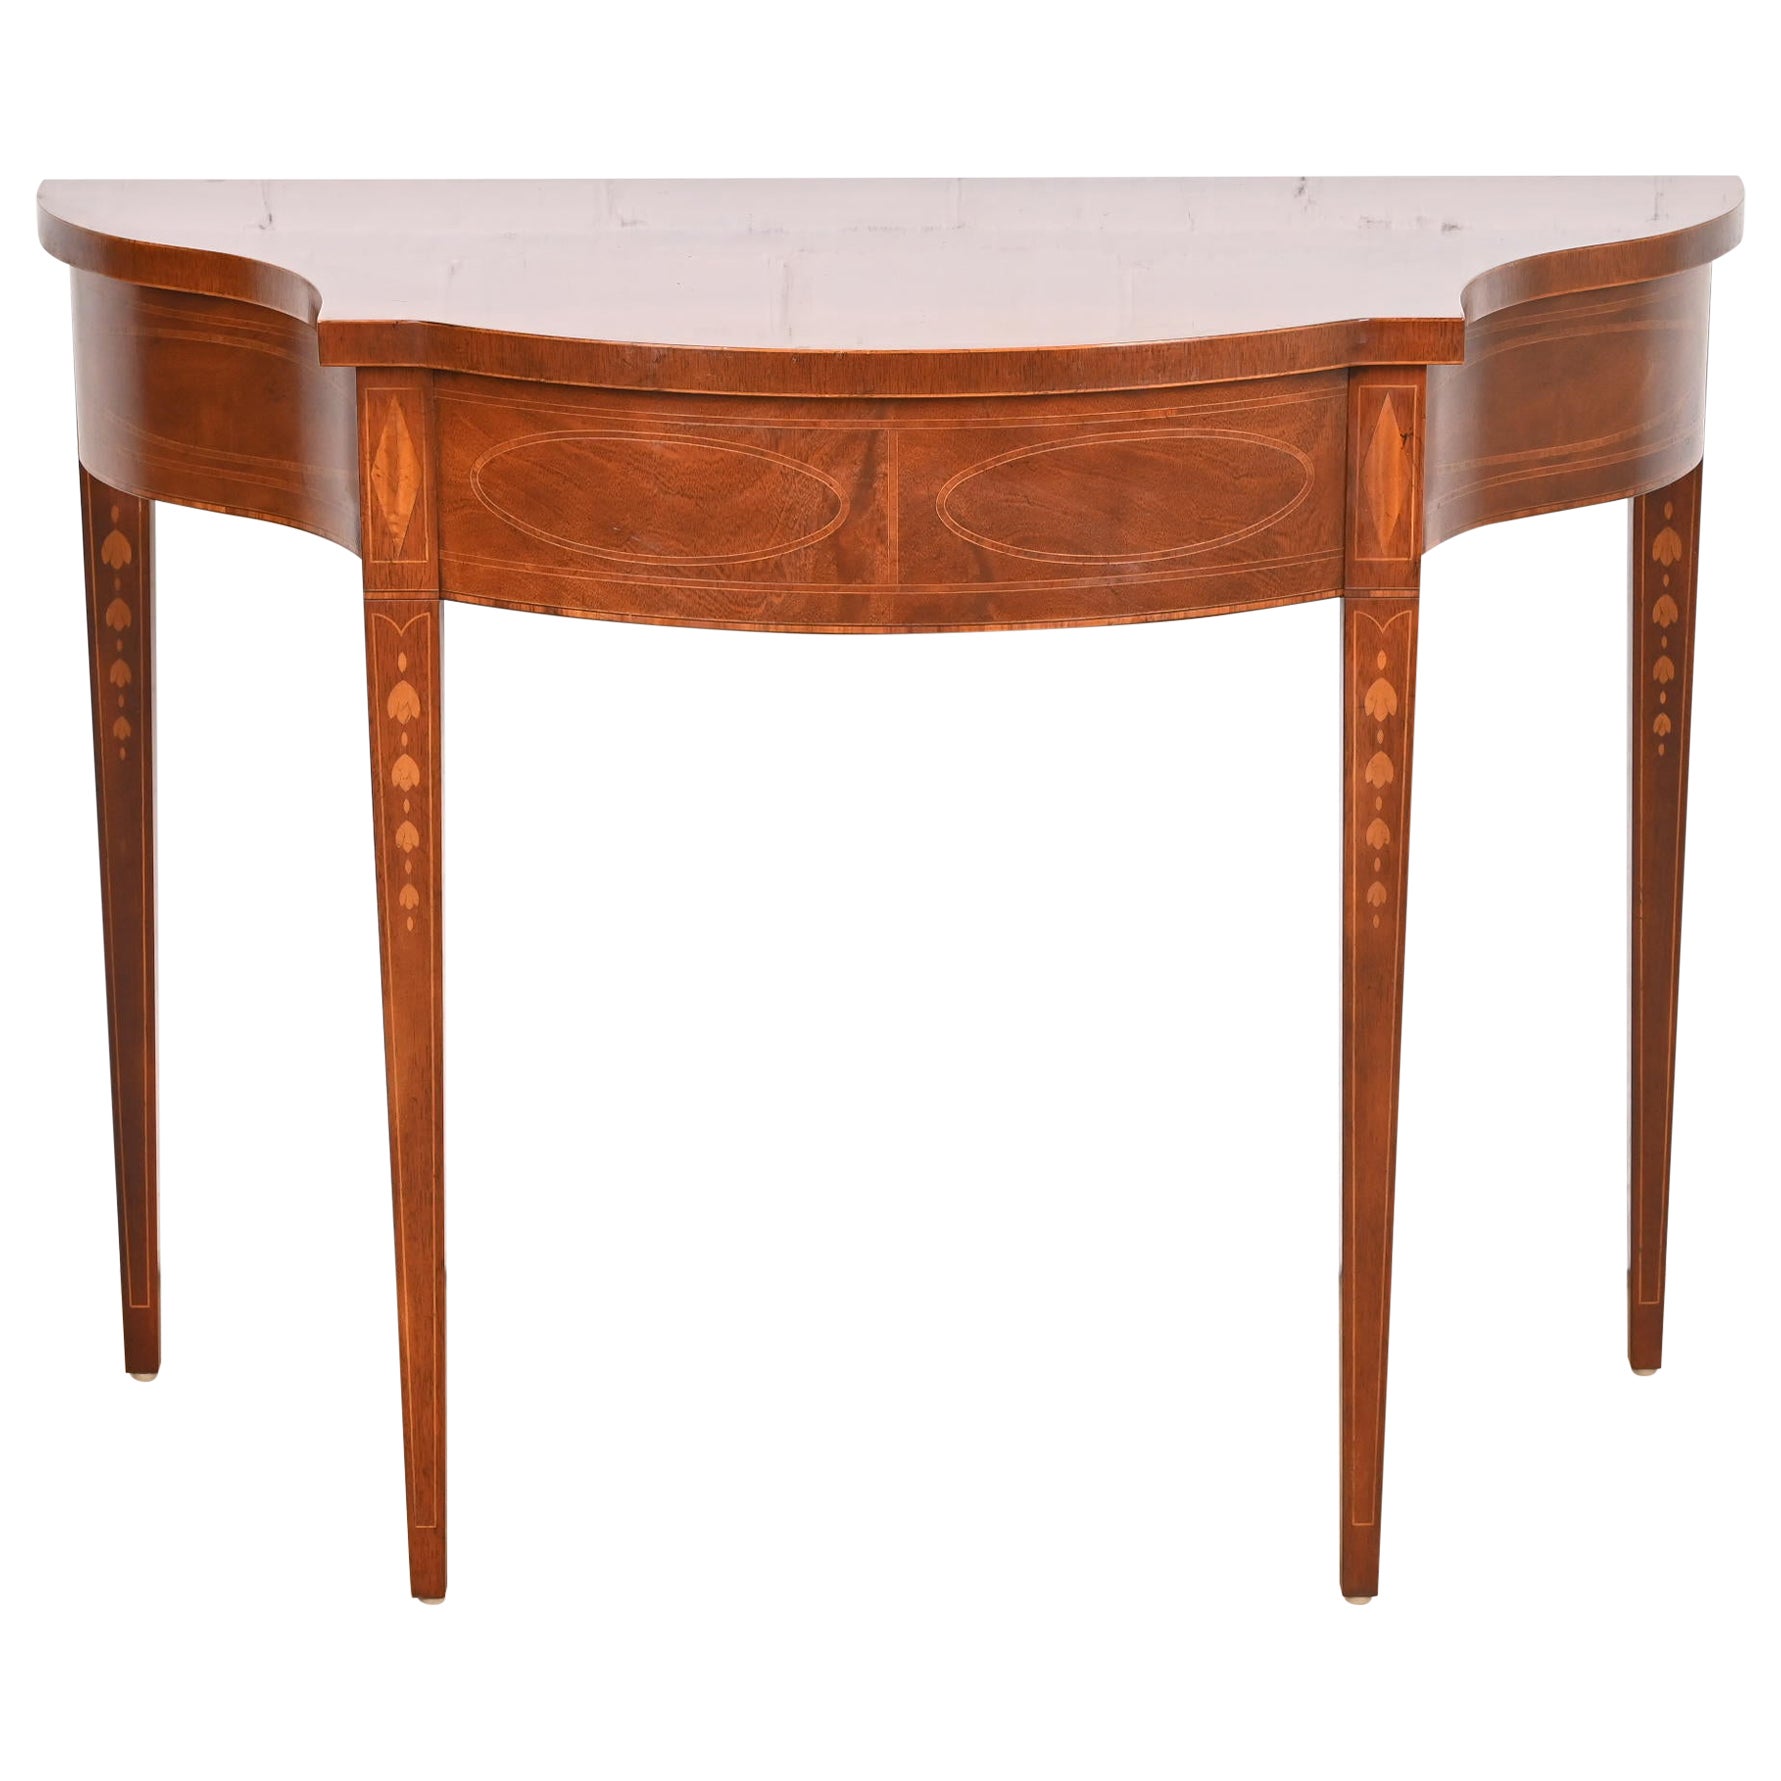 Baker Furniture Historic Charleston Federal Mahogany Console or Entry Table